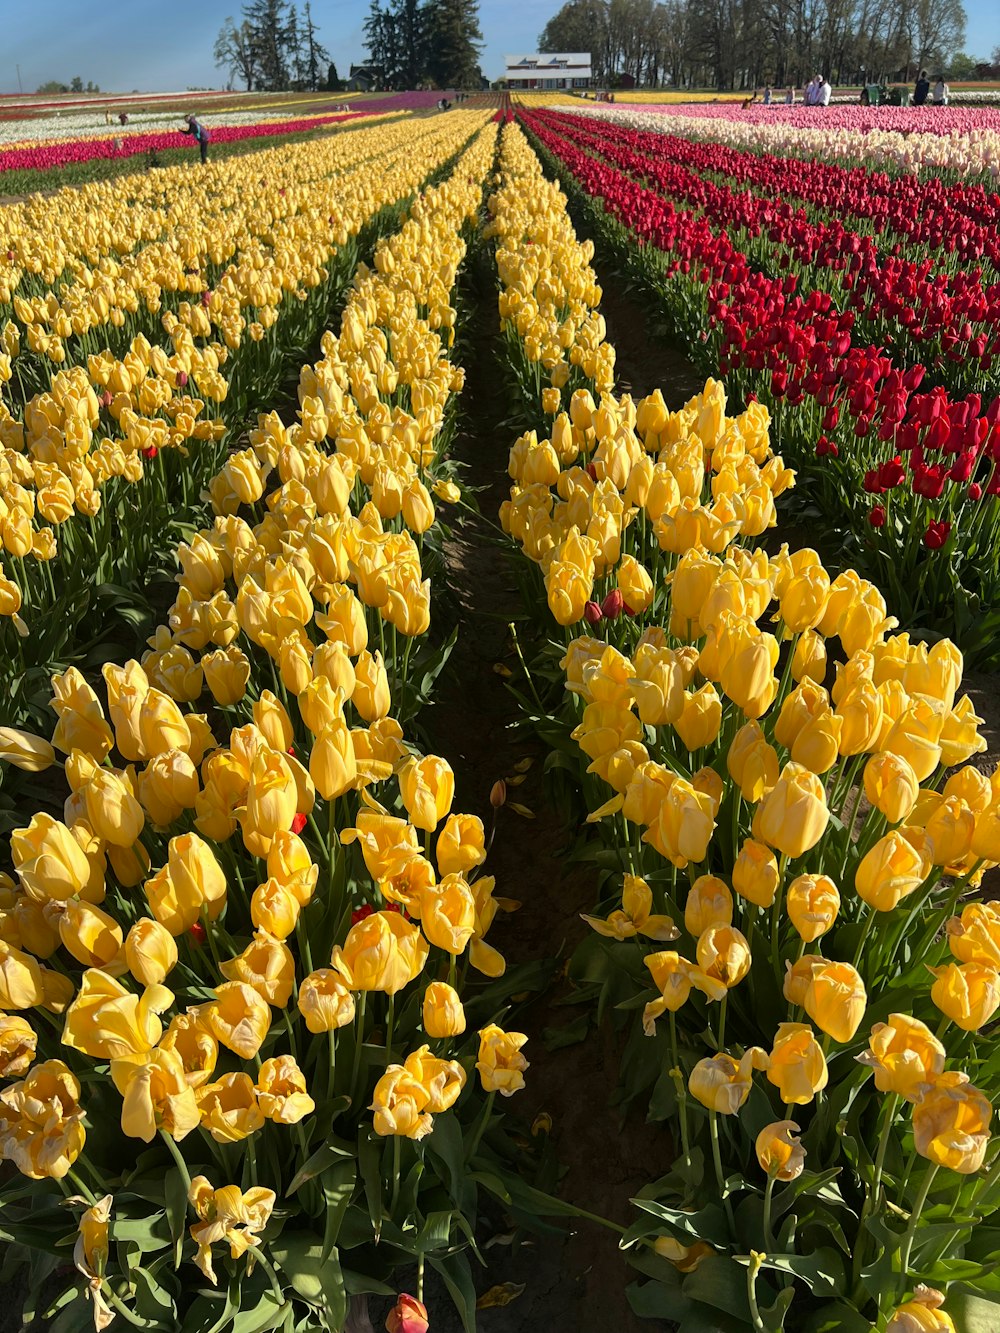 a field full of yellow and red tulips